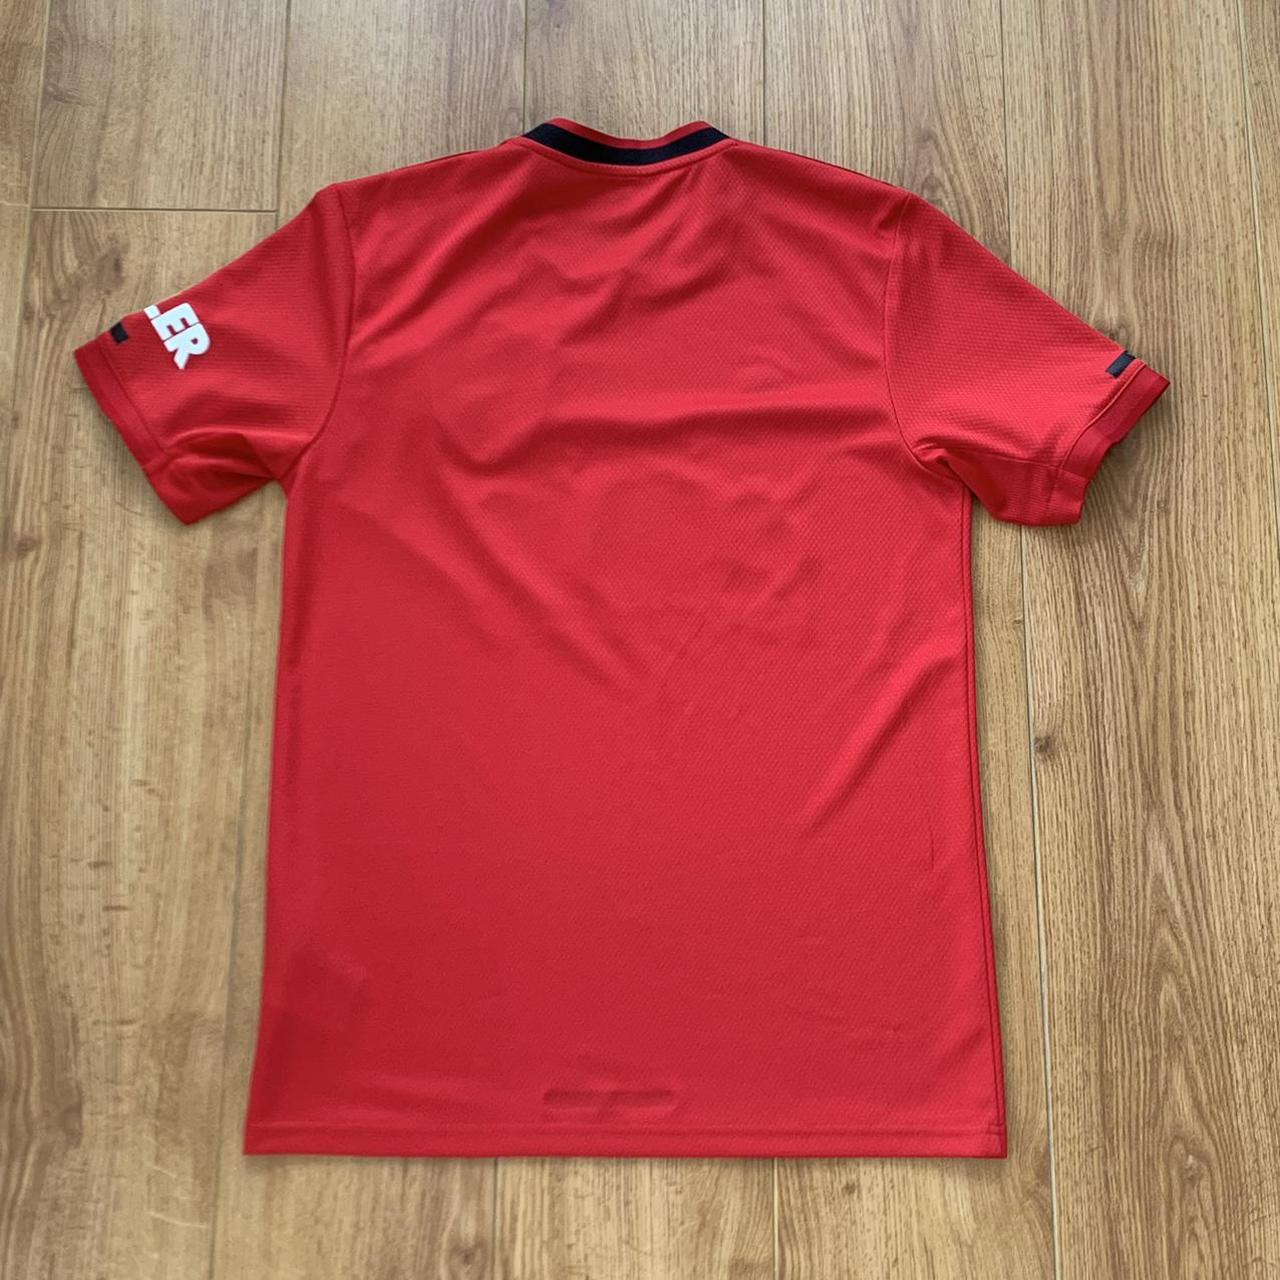 Manchester United Home Football Shirt from the year... - Depop